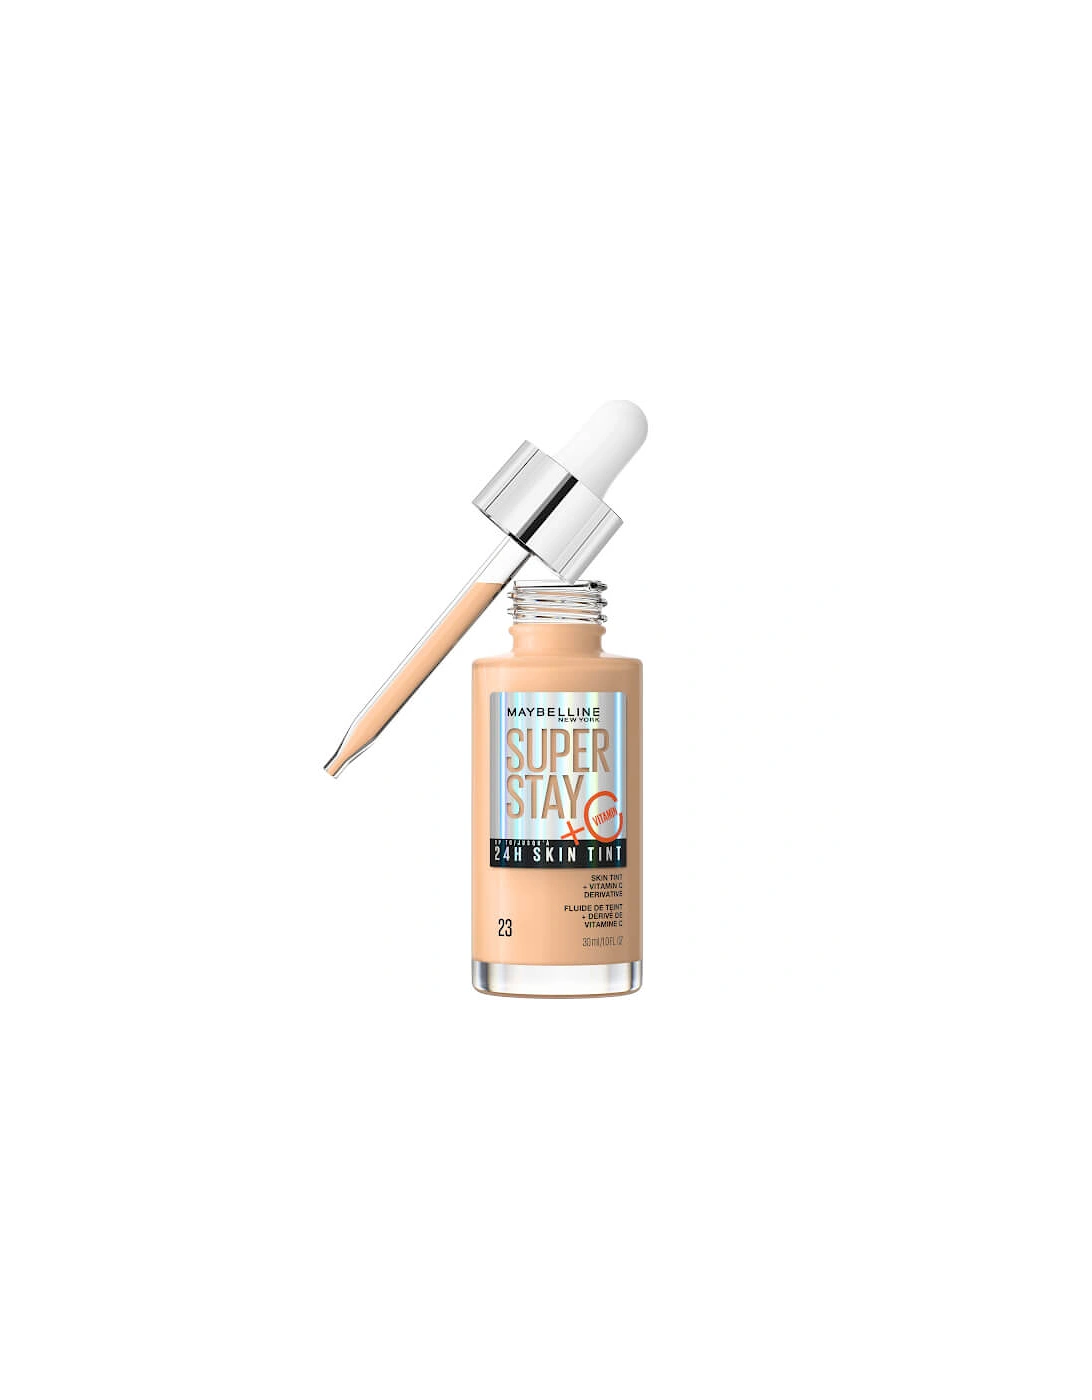 Super Stay up to 24H Skin Tint Foundation + Vitamin C - Shade 23, 2 of 1